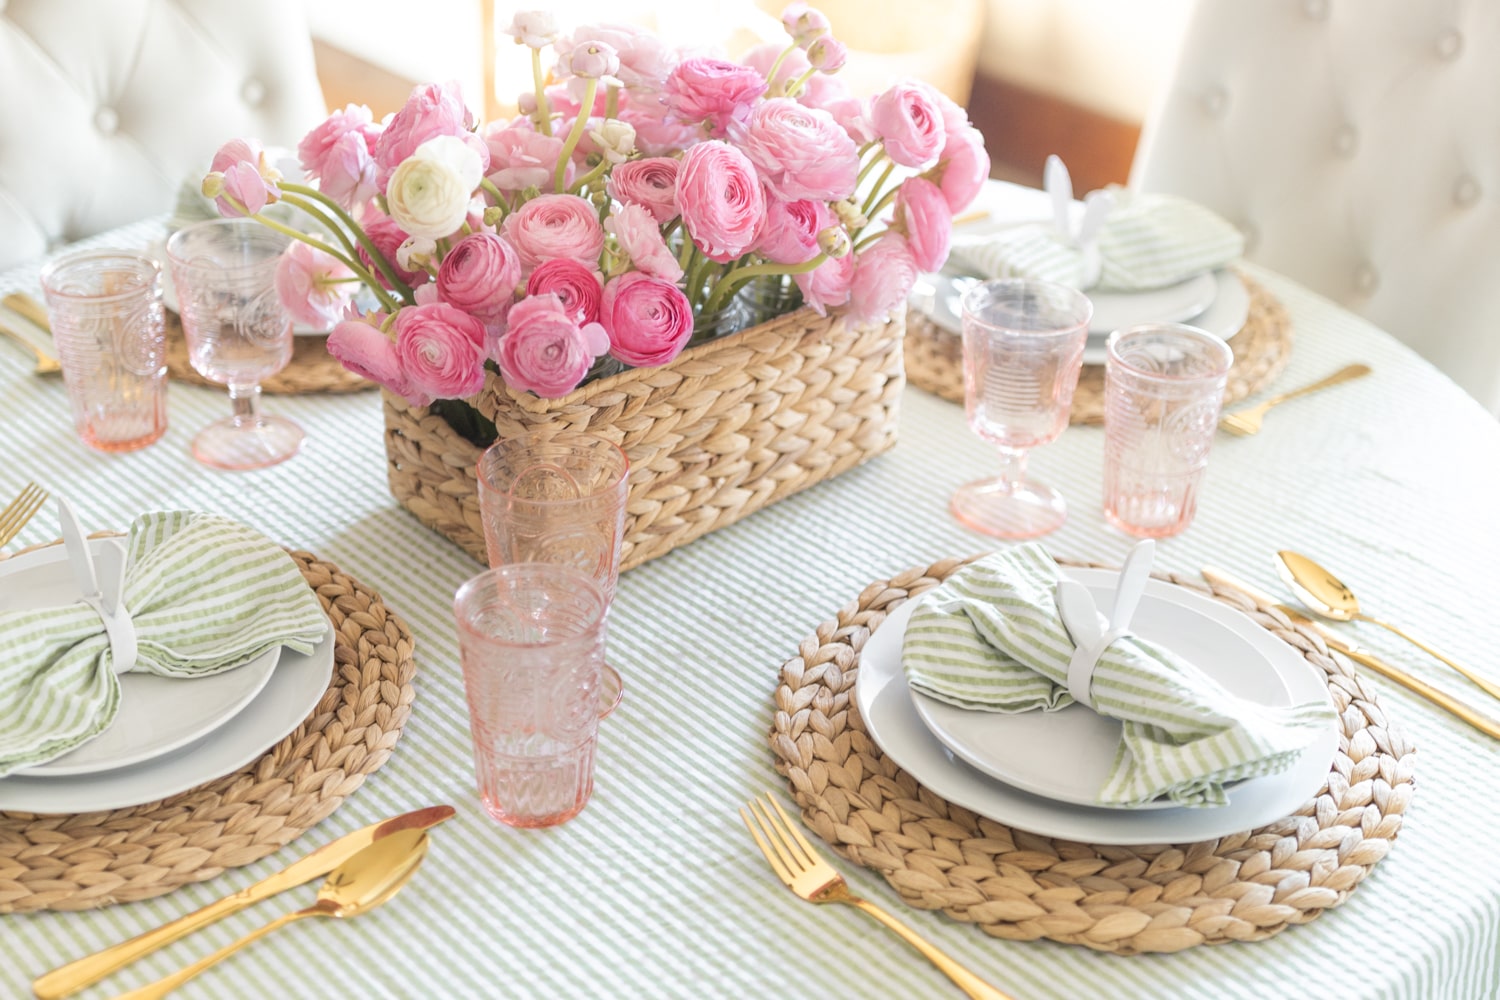 Blogger Stephanie Ziajka shares one of her favorite Easter tablescapes on Diary of a Debutante